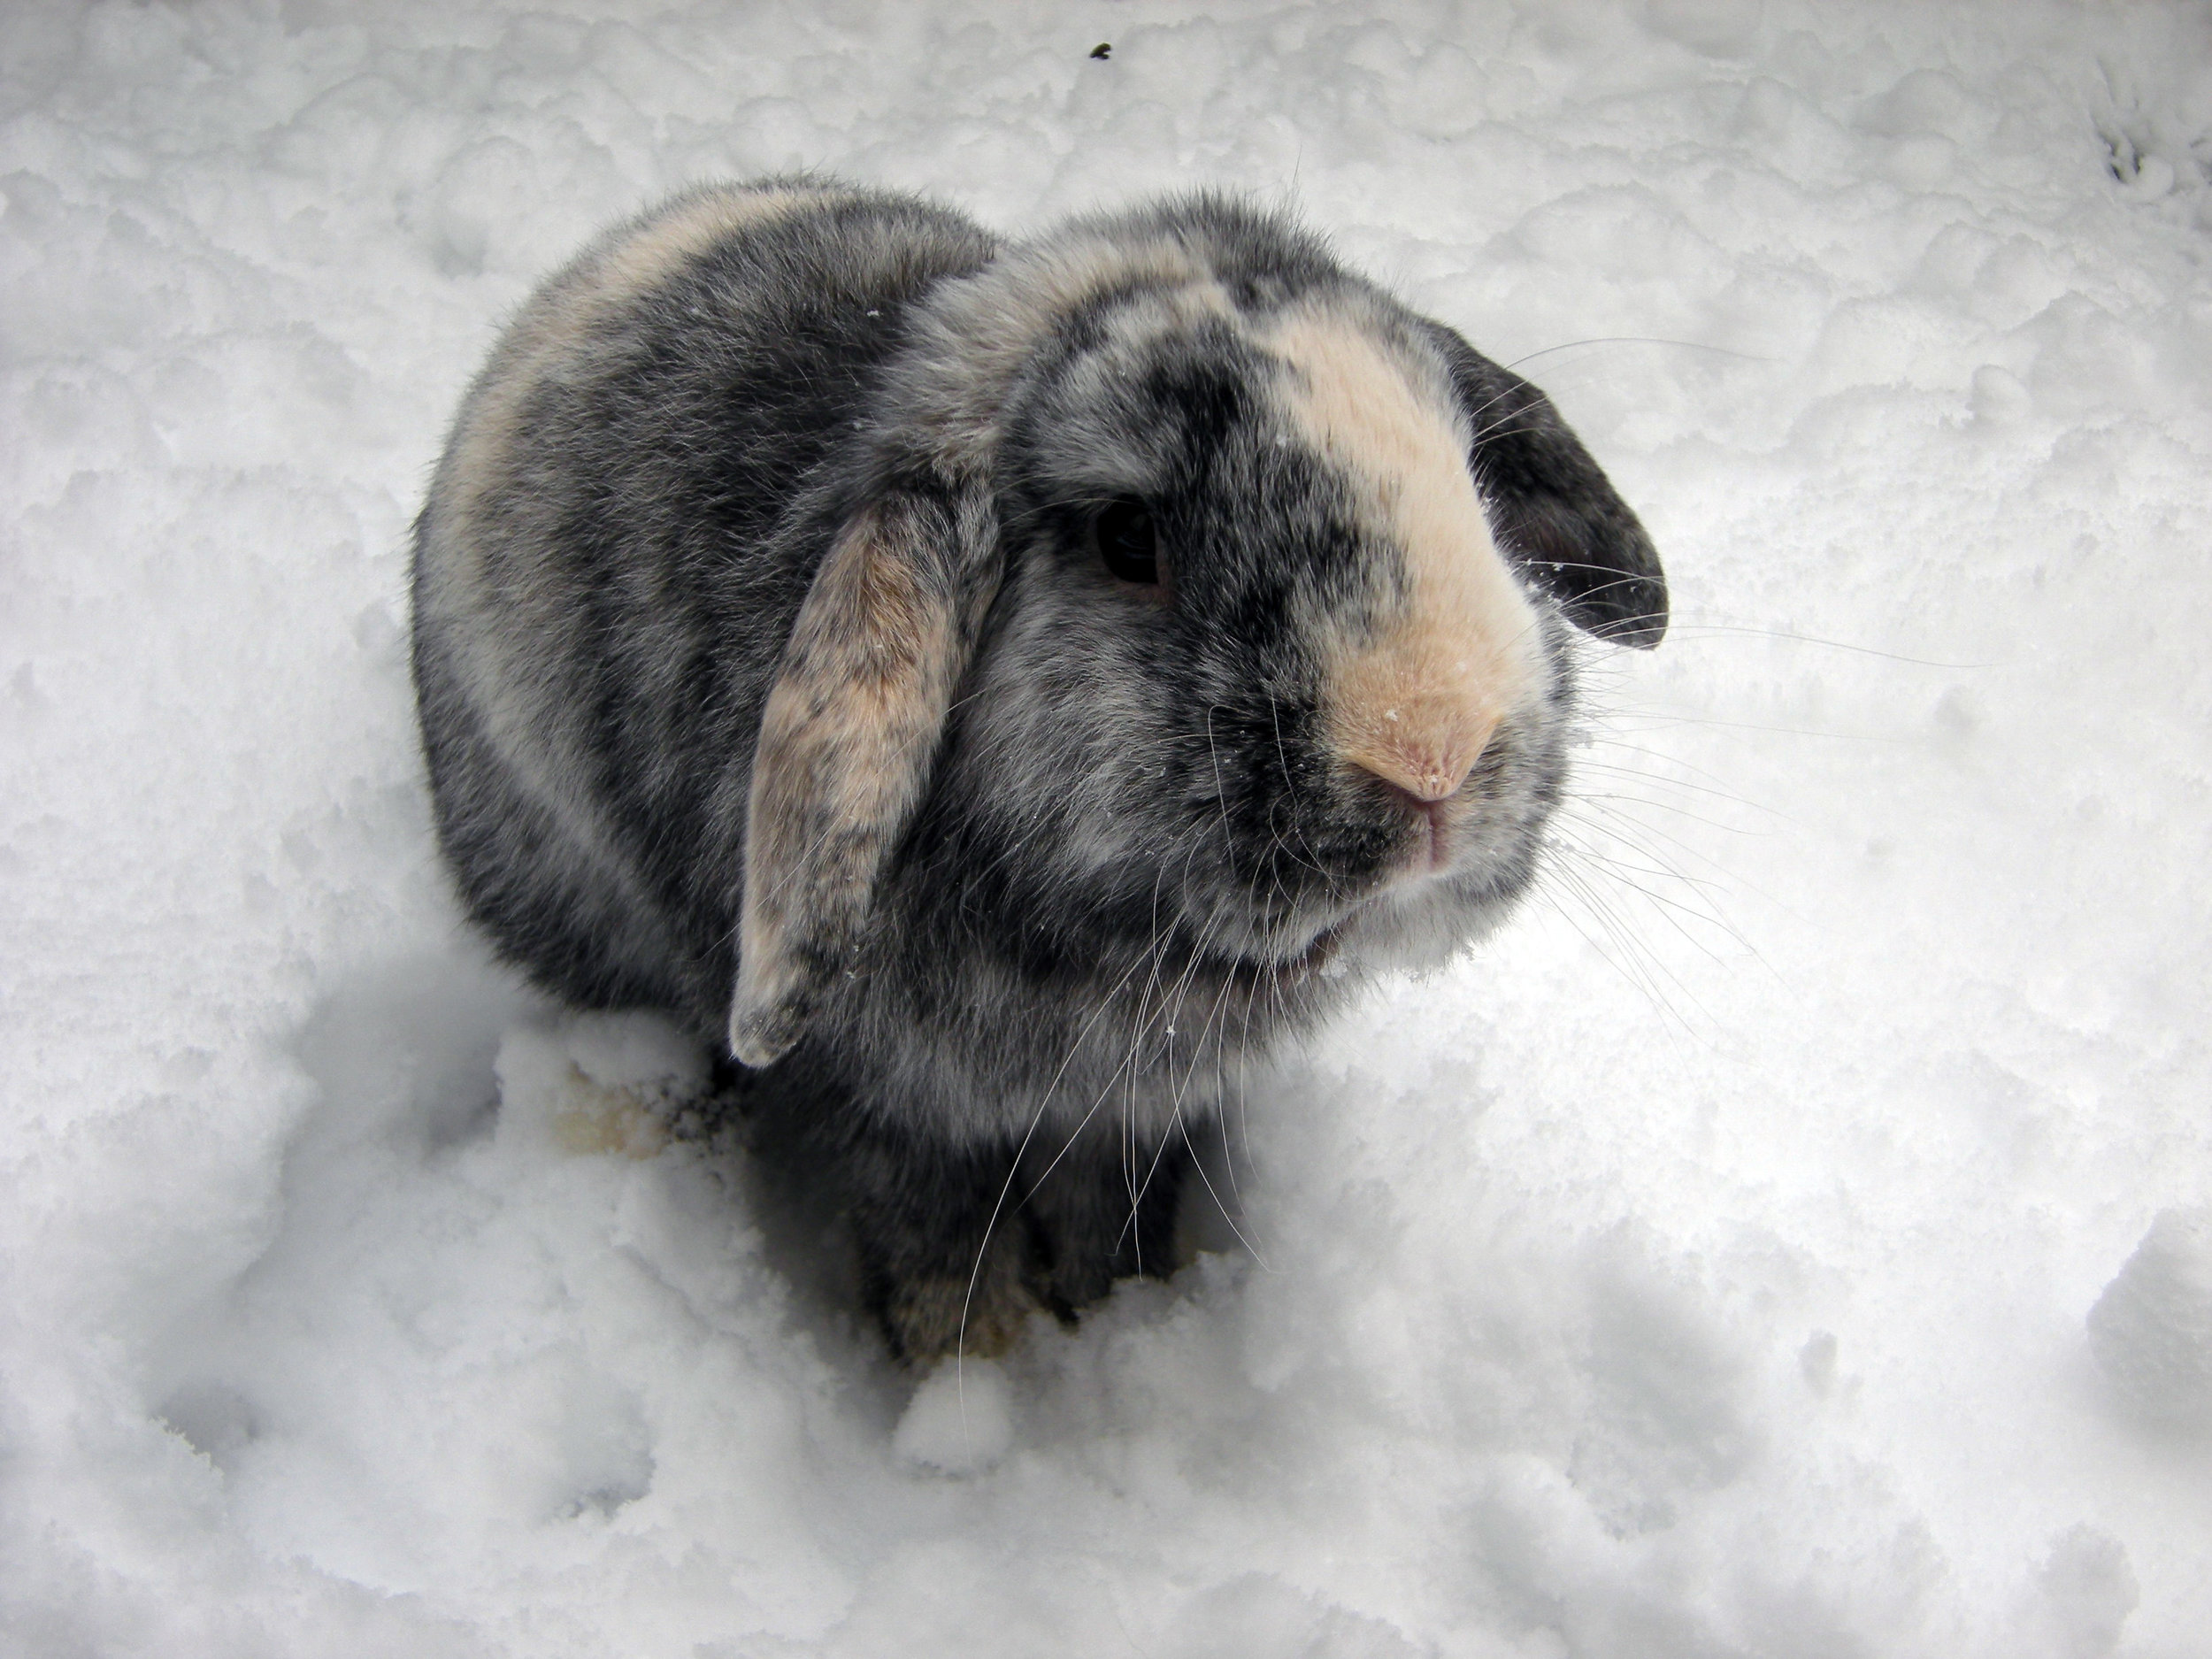 Bunny Isn't Sure What He Thinks About This Snow